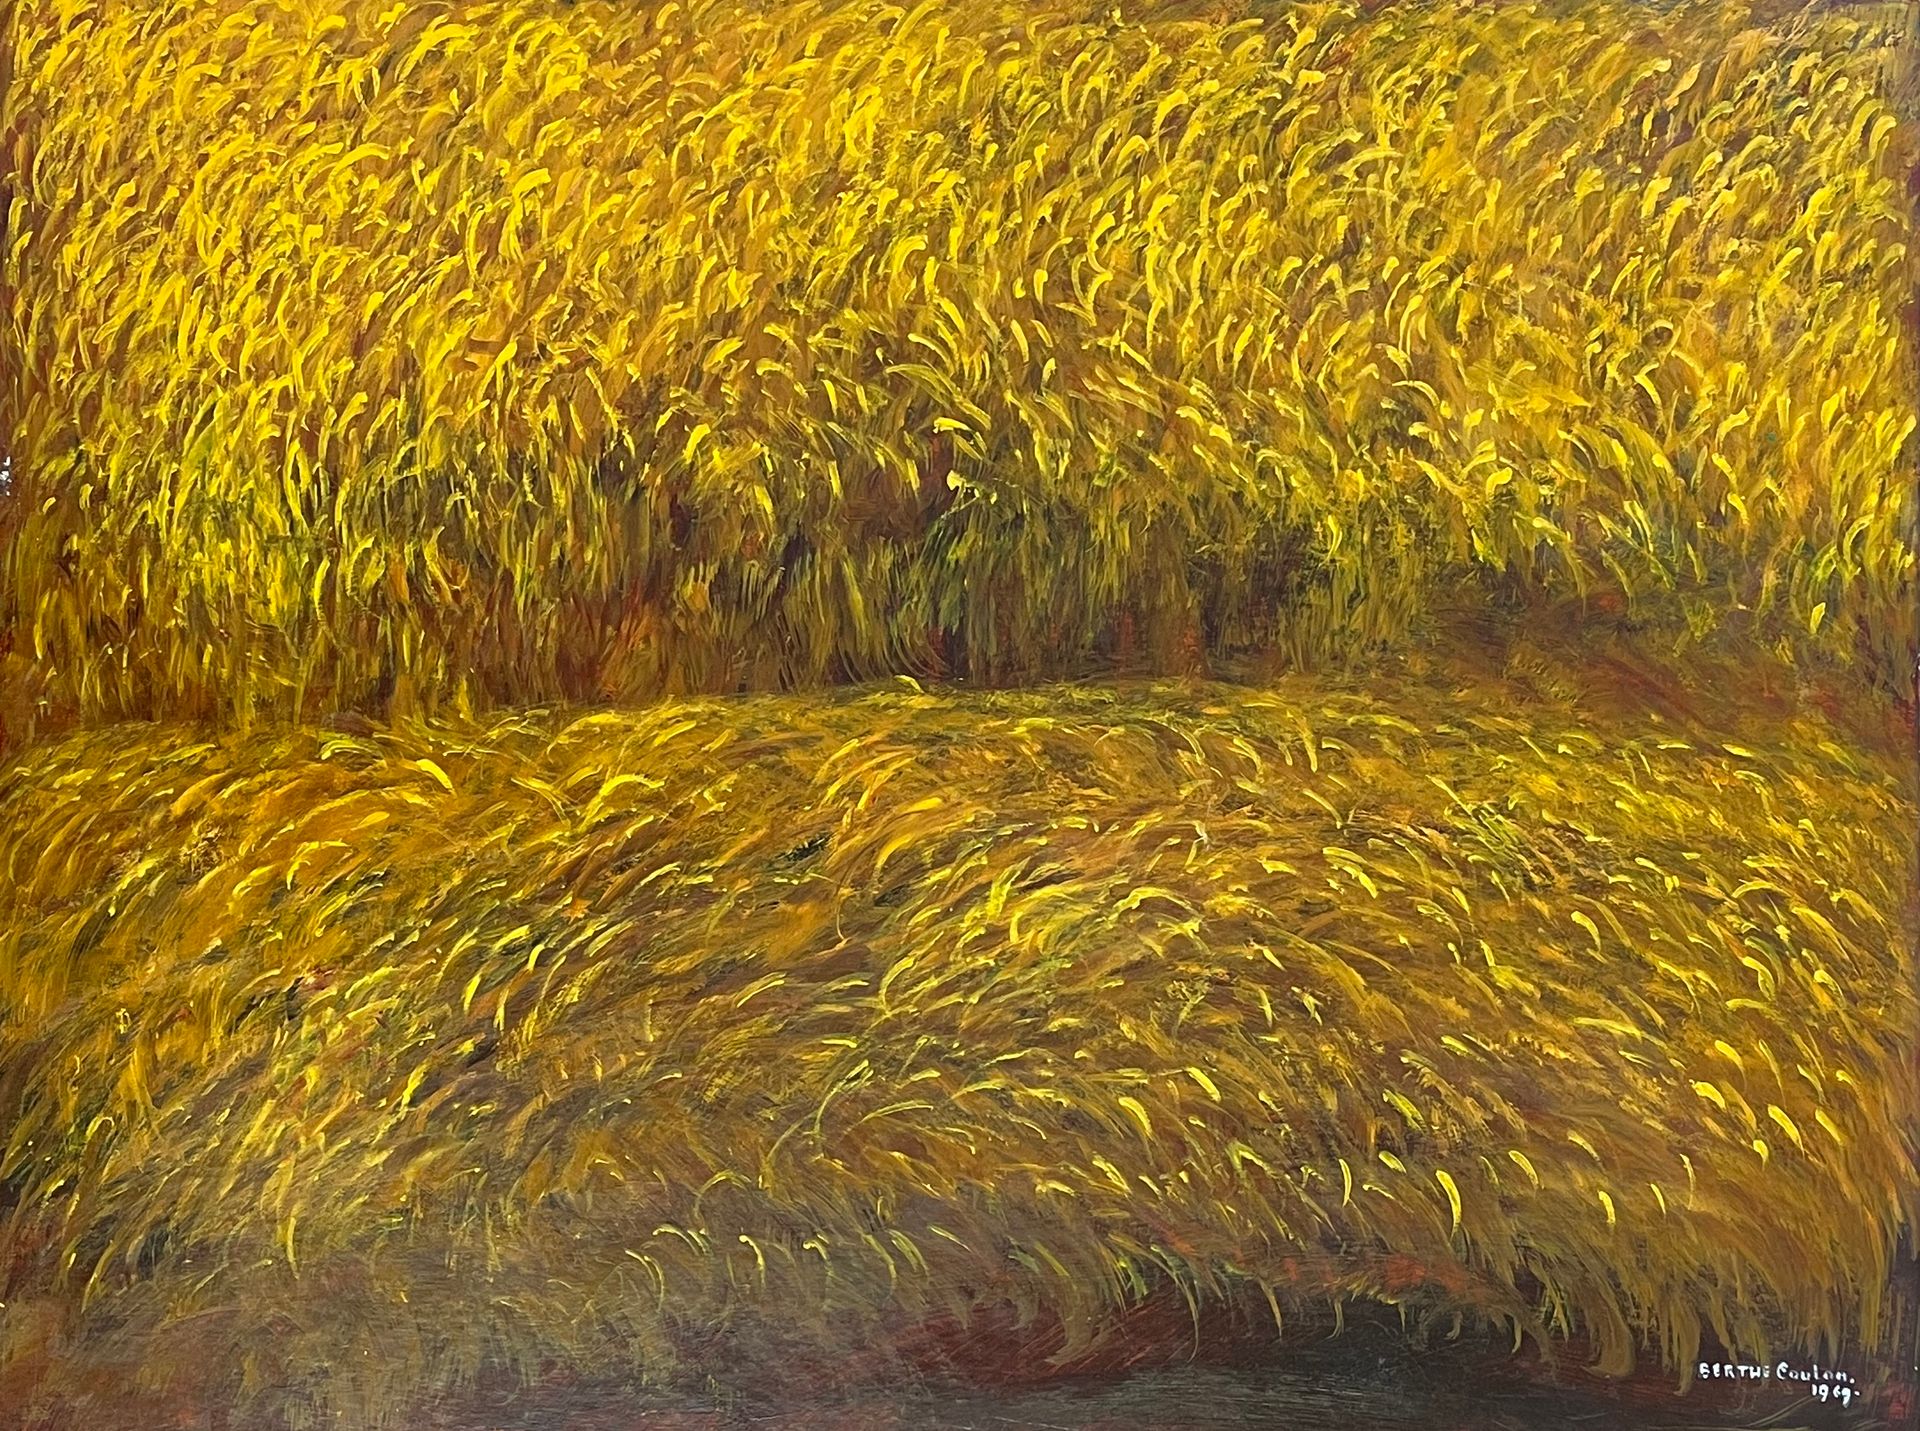 COULON (Berthe). "Field of wheat" (1969). Oil on strong cardboard, dated and sig&hellip;